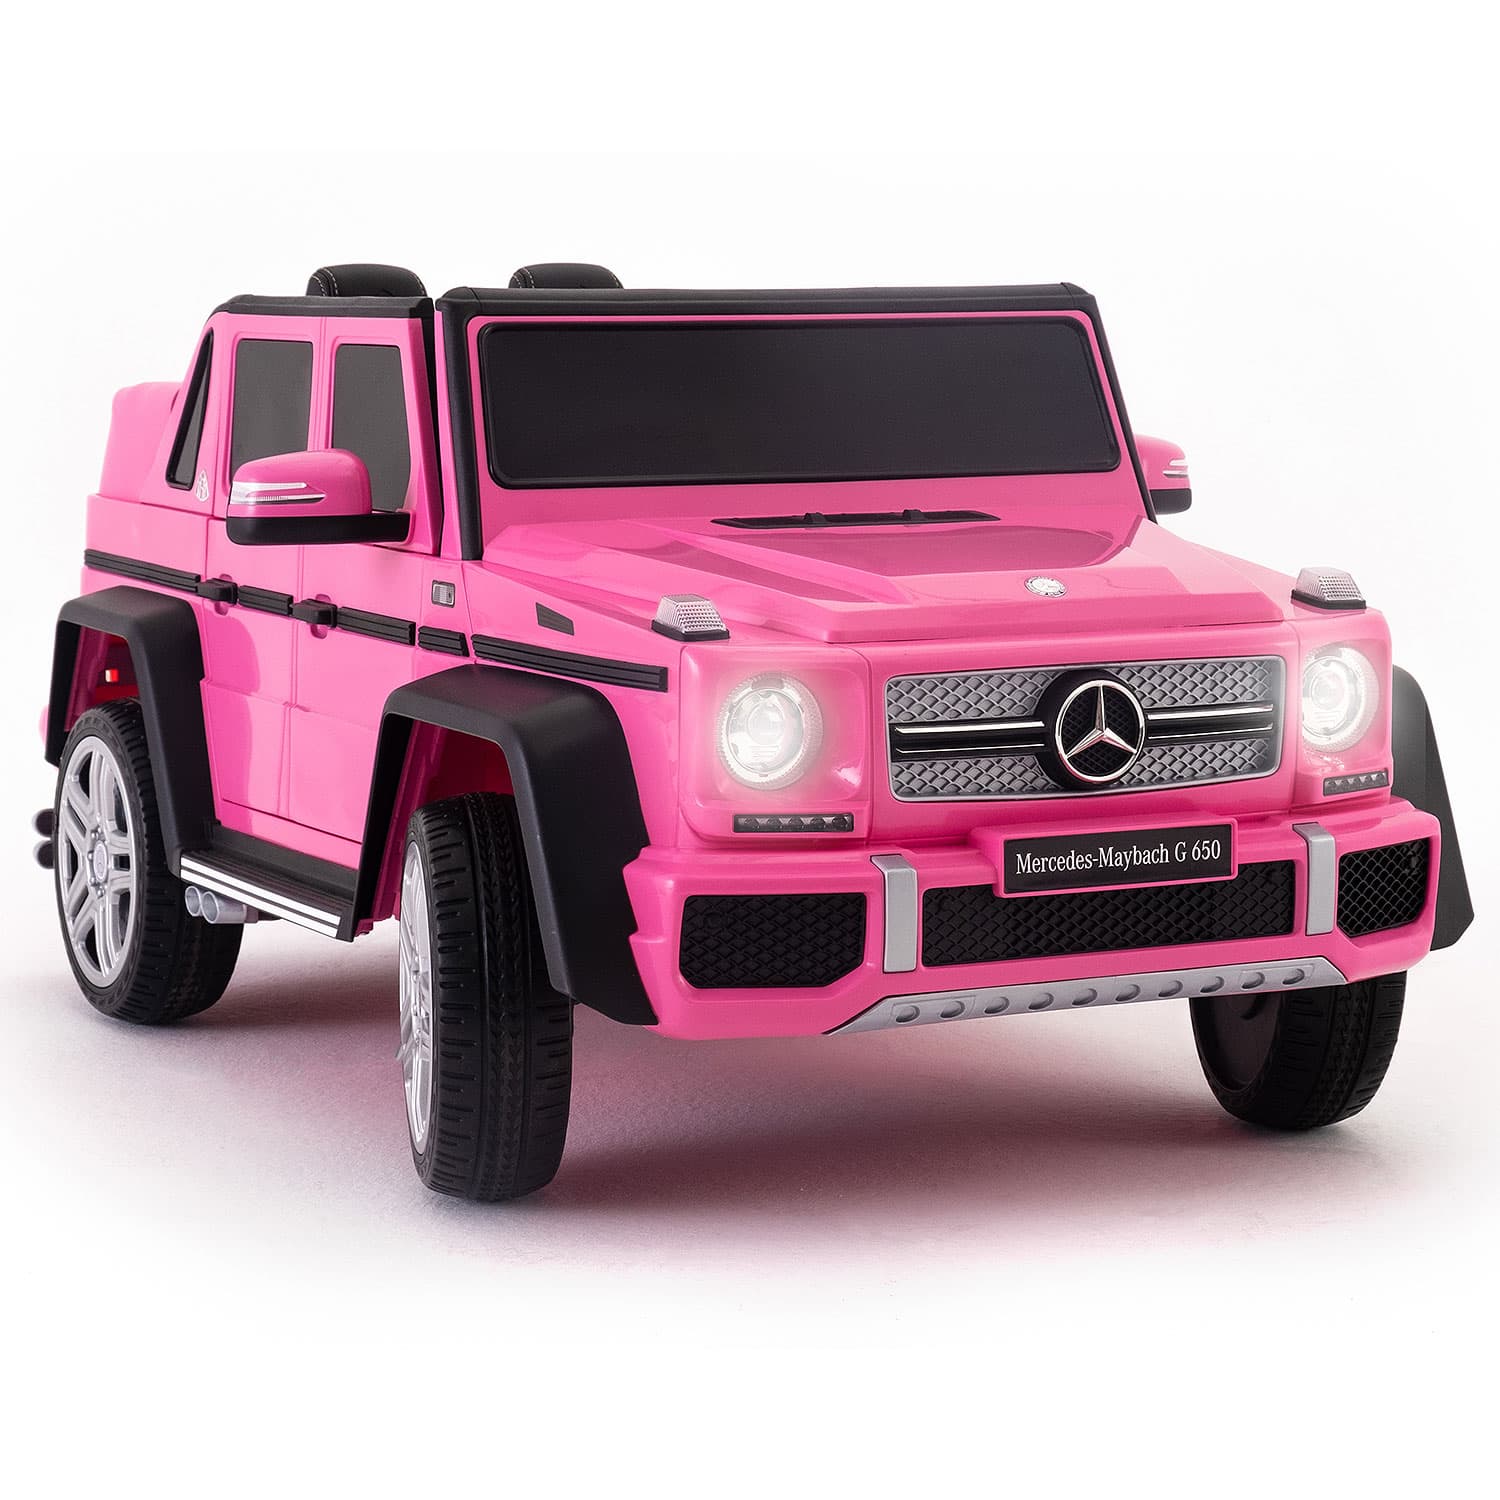 Mercedes Maybach G650 12v Kids Ride-on Car With Parental Remote | Pink